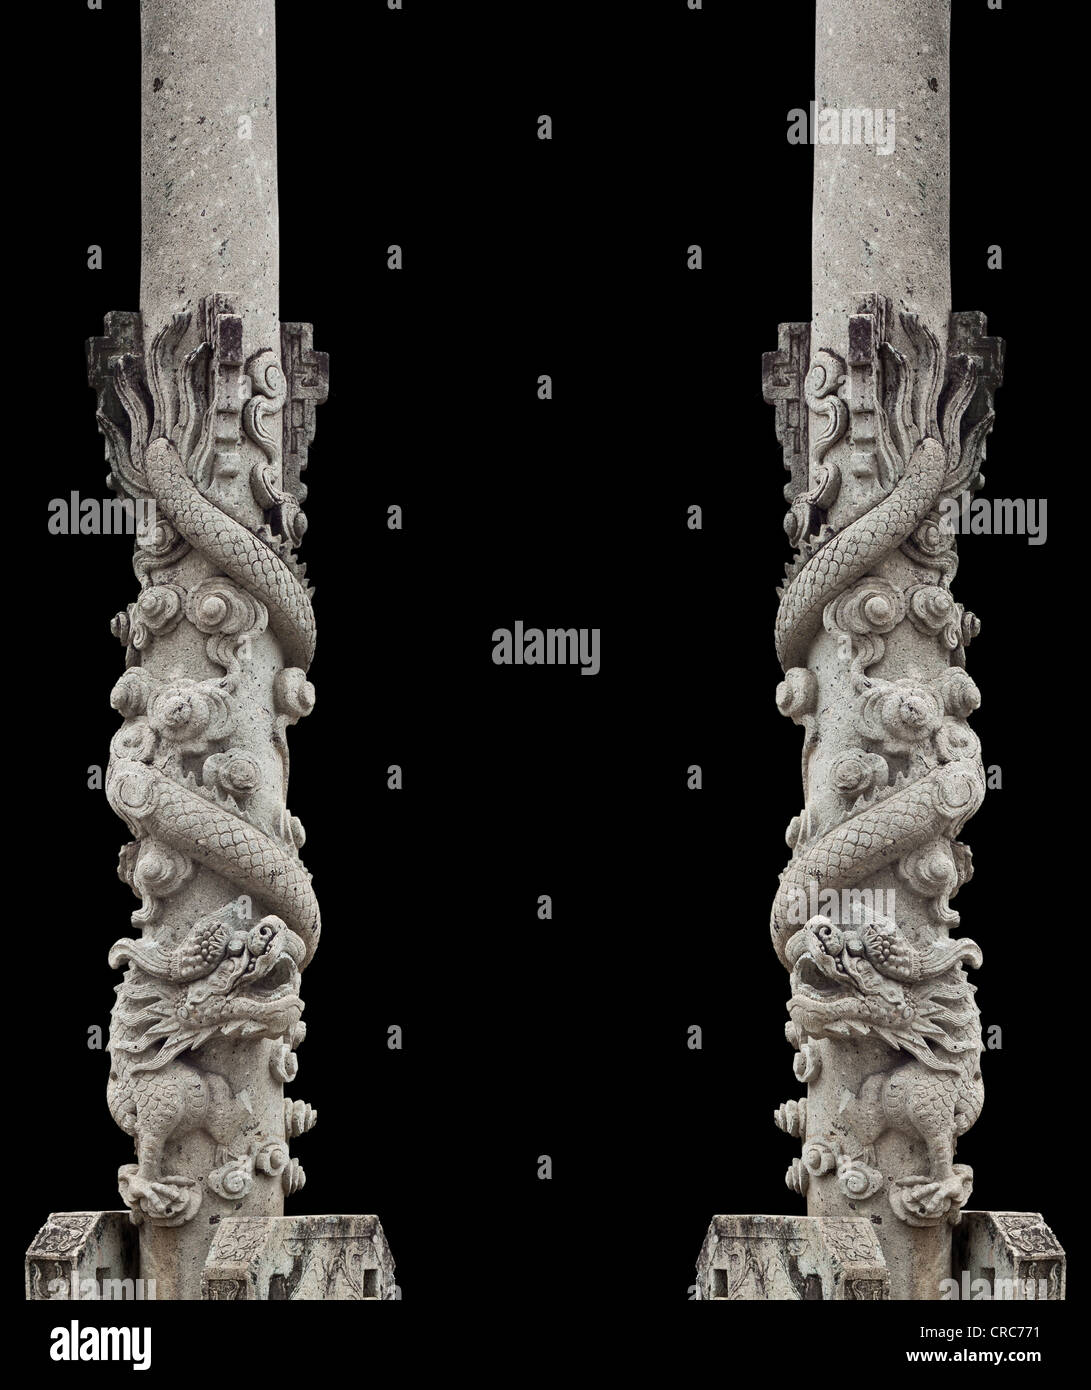 dragon stone pole, Chinese architecture built into the temples in Thailand. Stock Photo